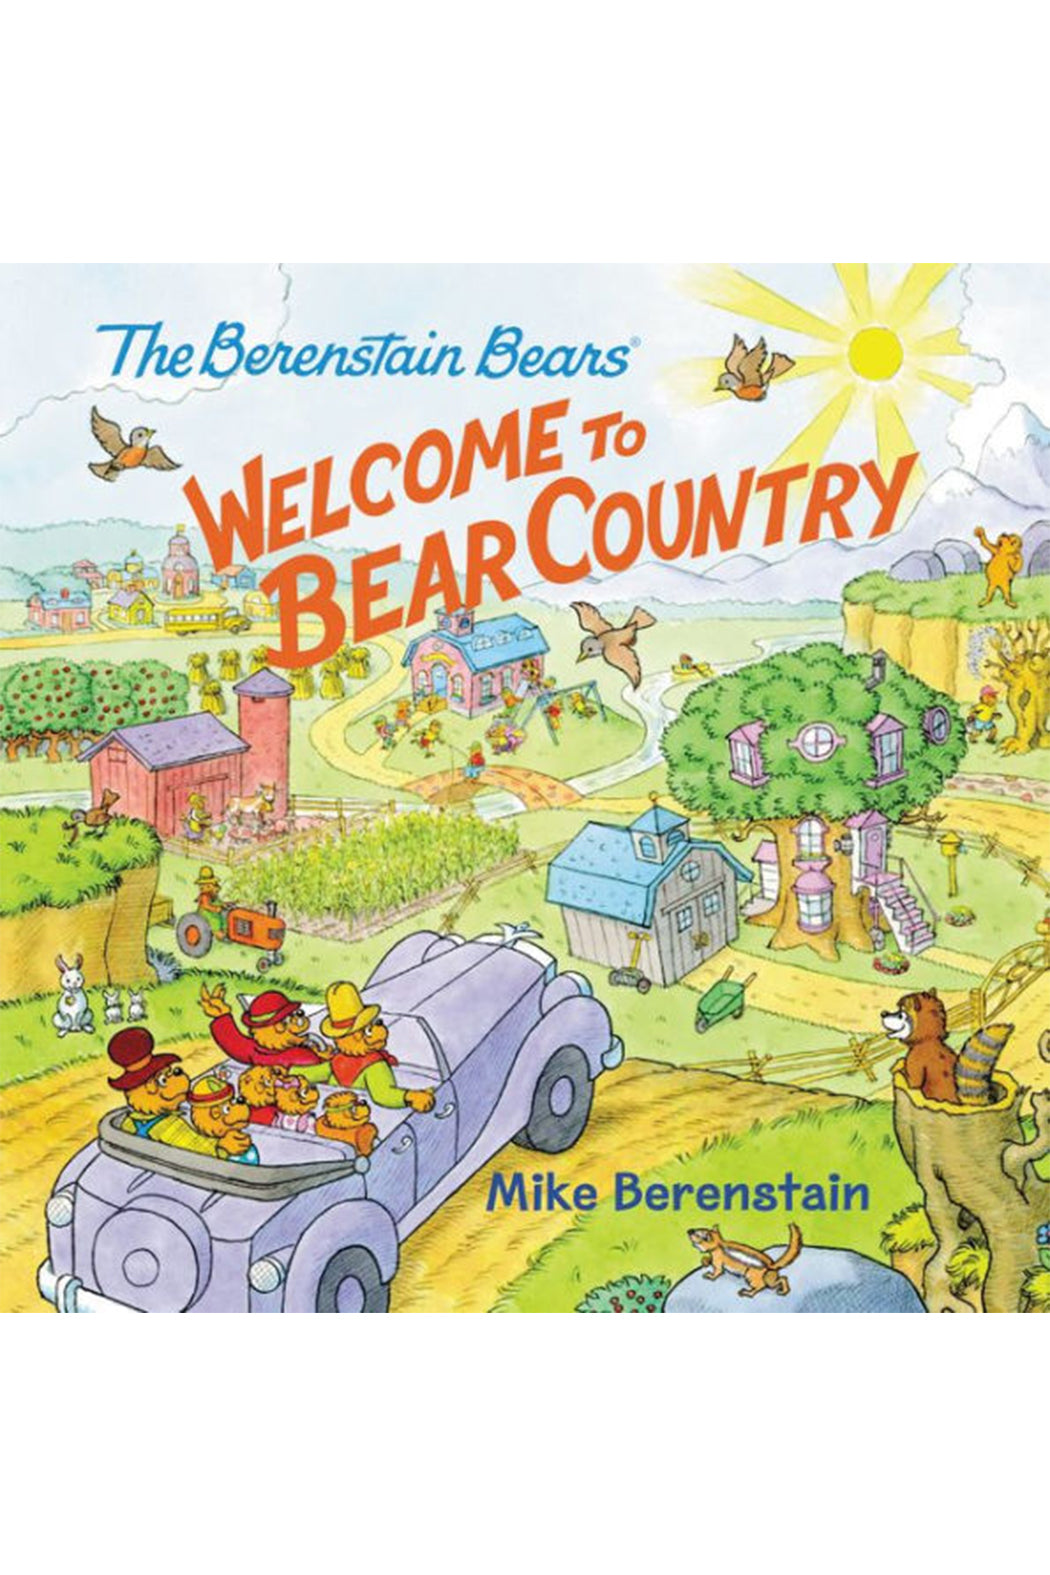 Bernstain Bears: Welcome To Bear Country